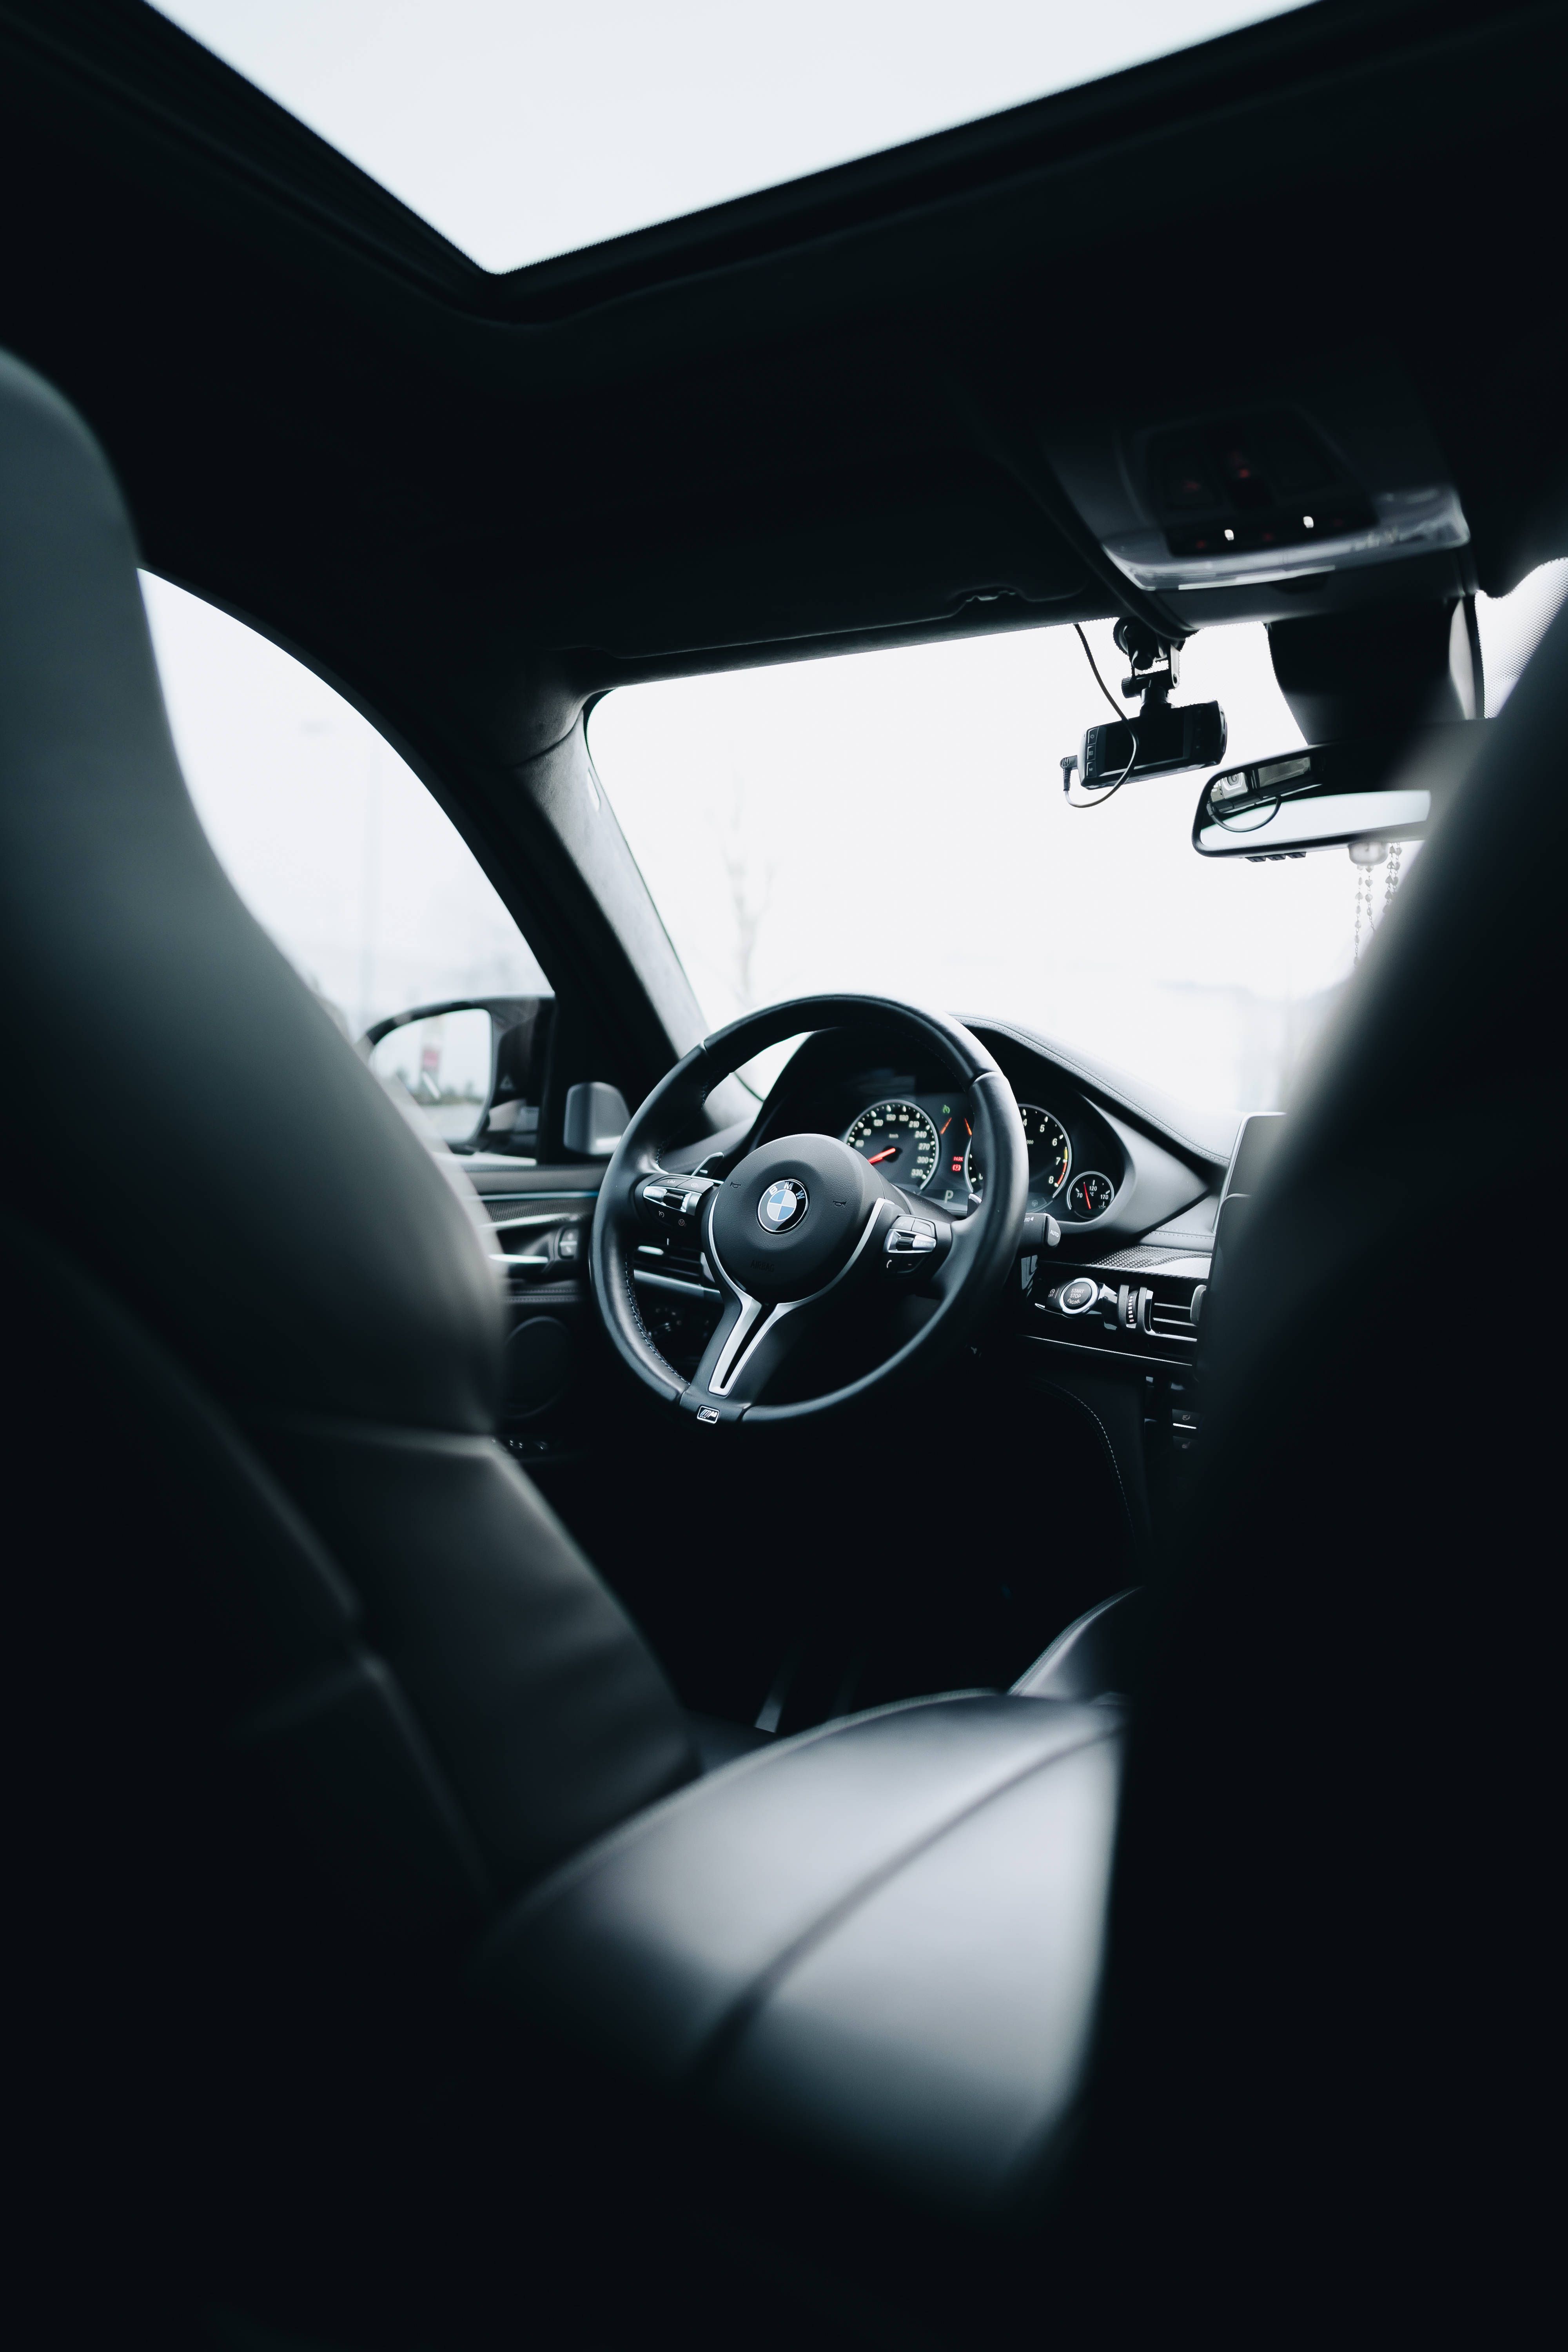 A car interior with the steering wheel and dashboard - BMW